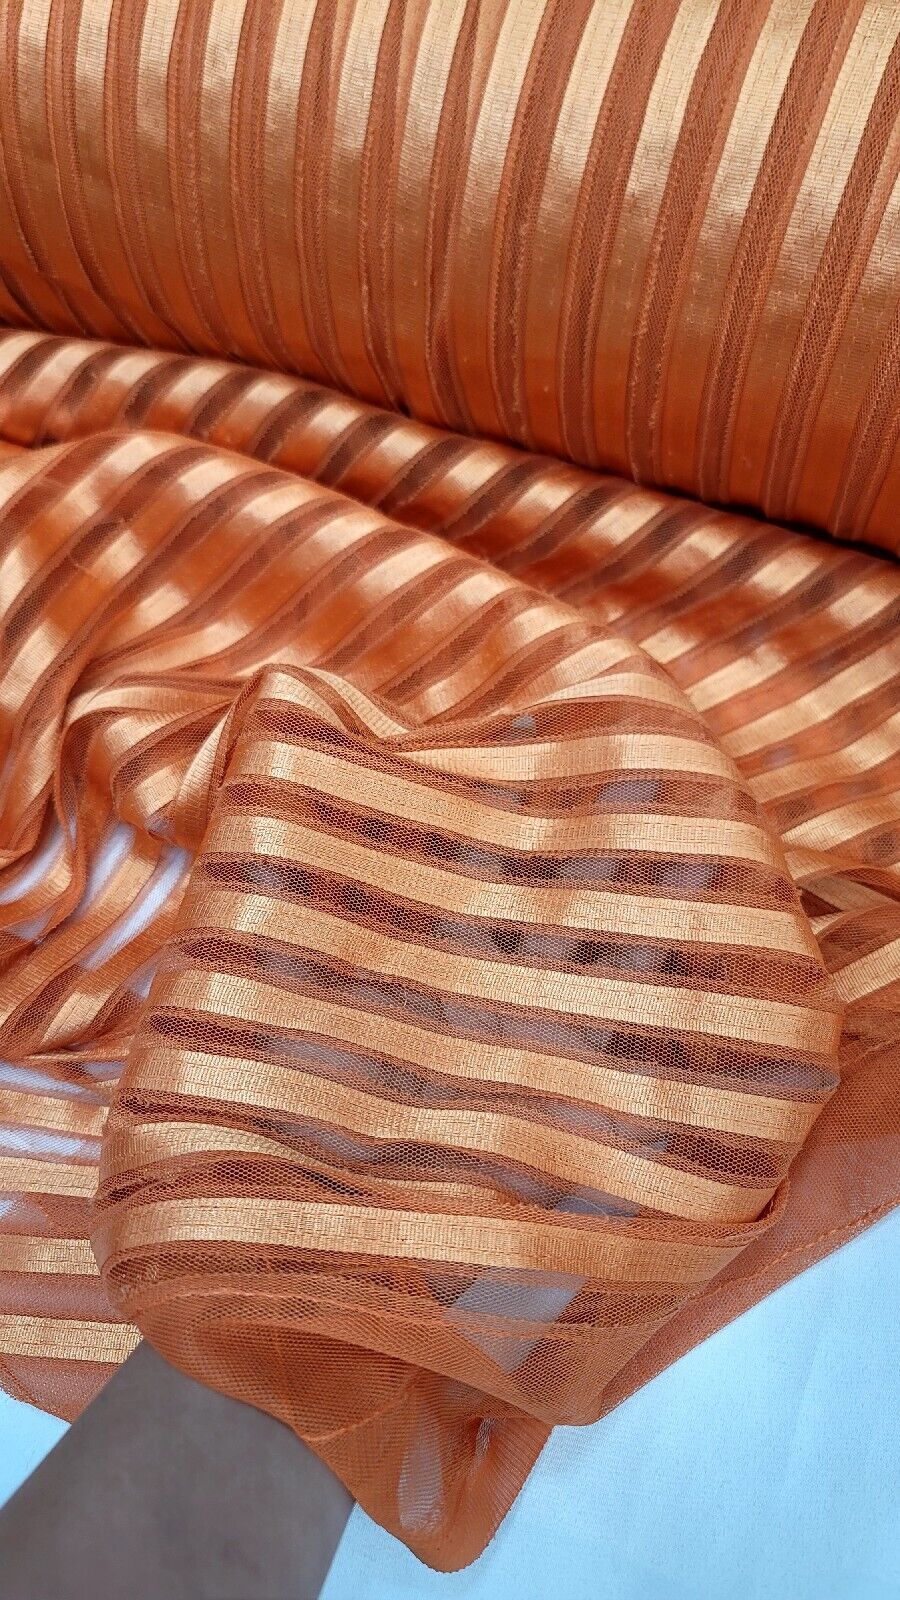 Orange Stretch Lace Ribbon Lace Striped Fabric Sold By The Yard Embroidery Lace